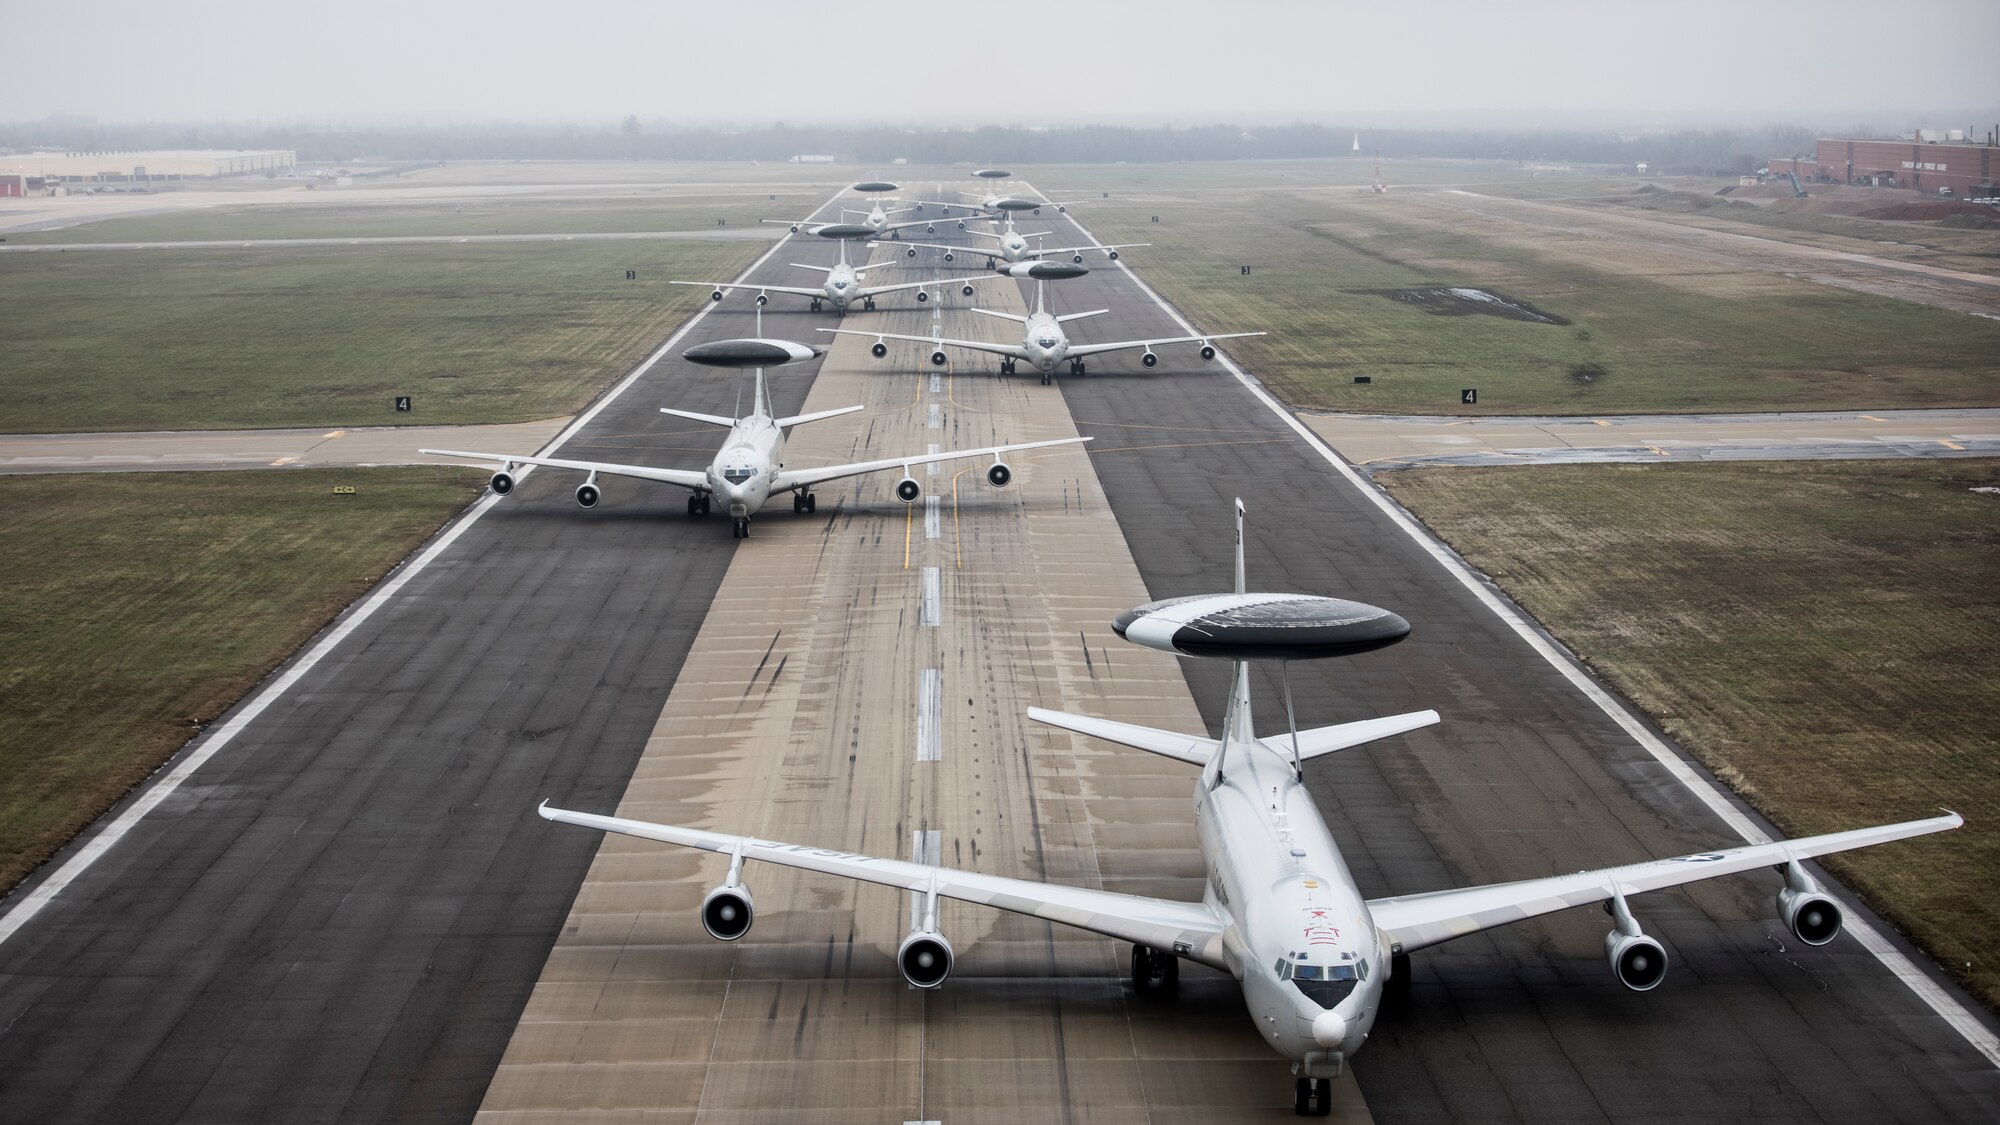 Seven E-3 Sentry aircraft staggered on the runway.